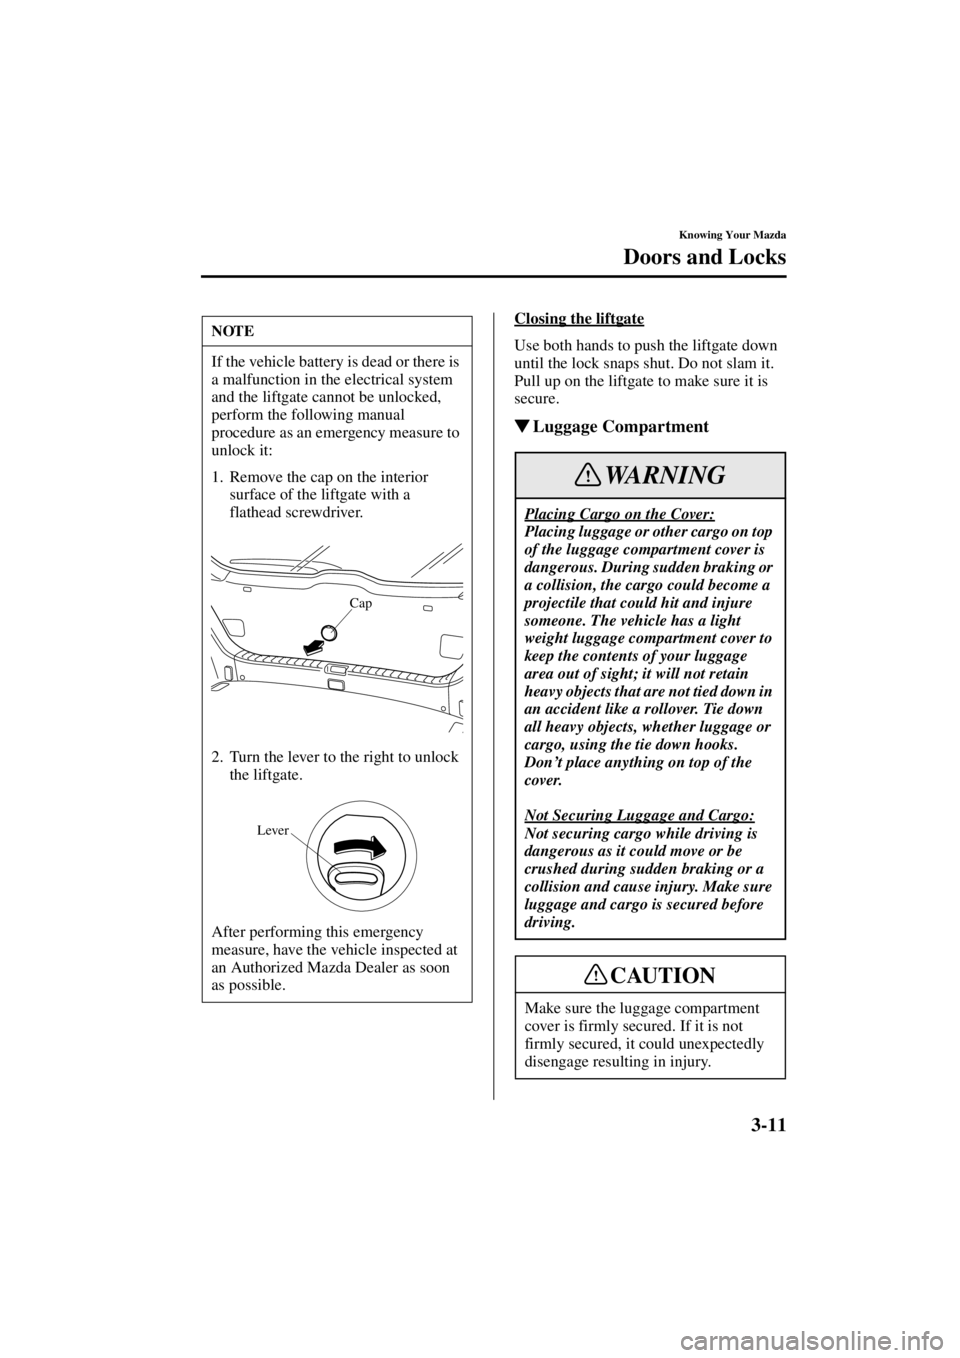 MAZDA MODEL 3 4-DOOR 2004 Owners Guide 3-11
Knowing Your Mazda
Doors and Locks
Form No. 8S18-EA-03I
Closing the liftgate
Use both hands to push the liftgate down 
until the lock snaps shut. Do not slam it. 
Pull up on the liftgate to make 